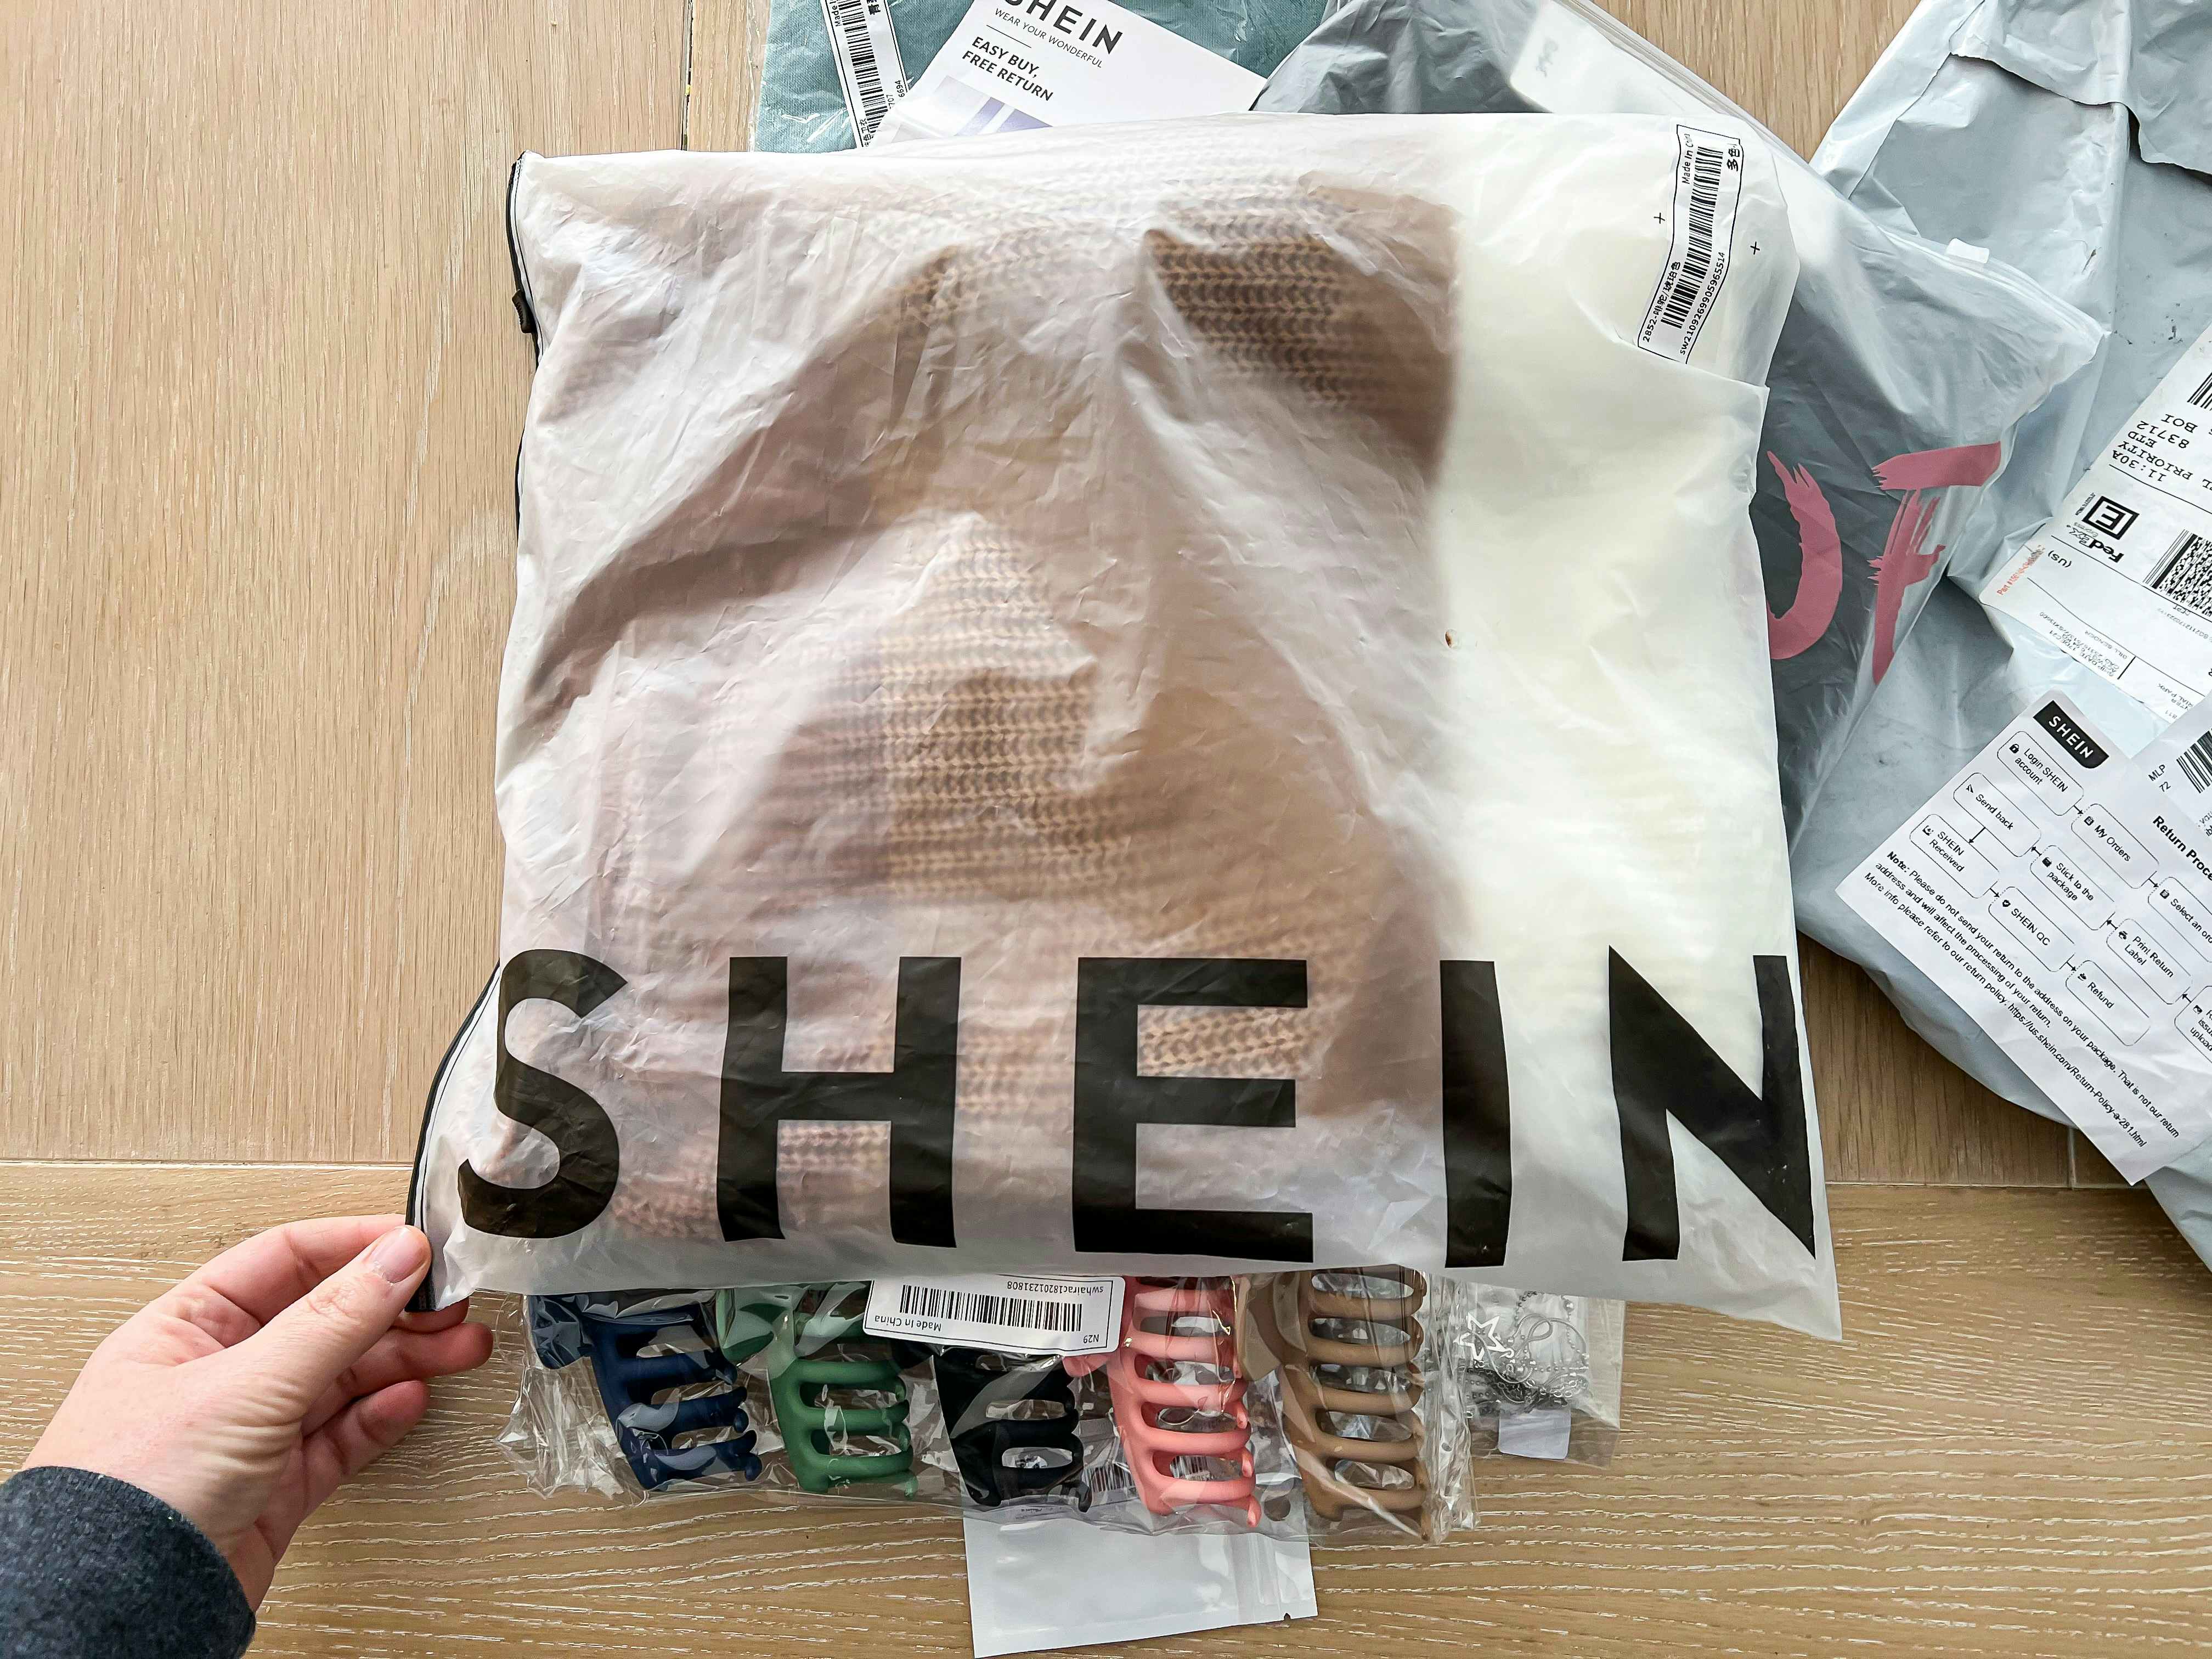 A person's hand grabbing a package of SHEIN clothes sitting on a wooden table.